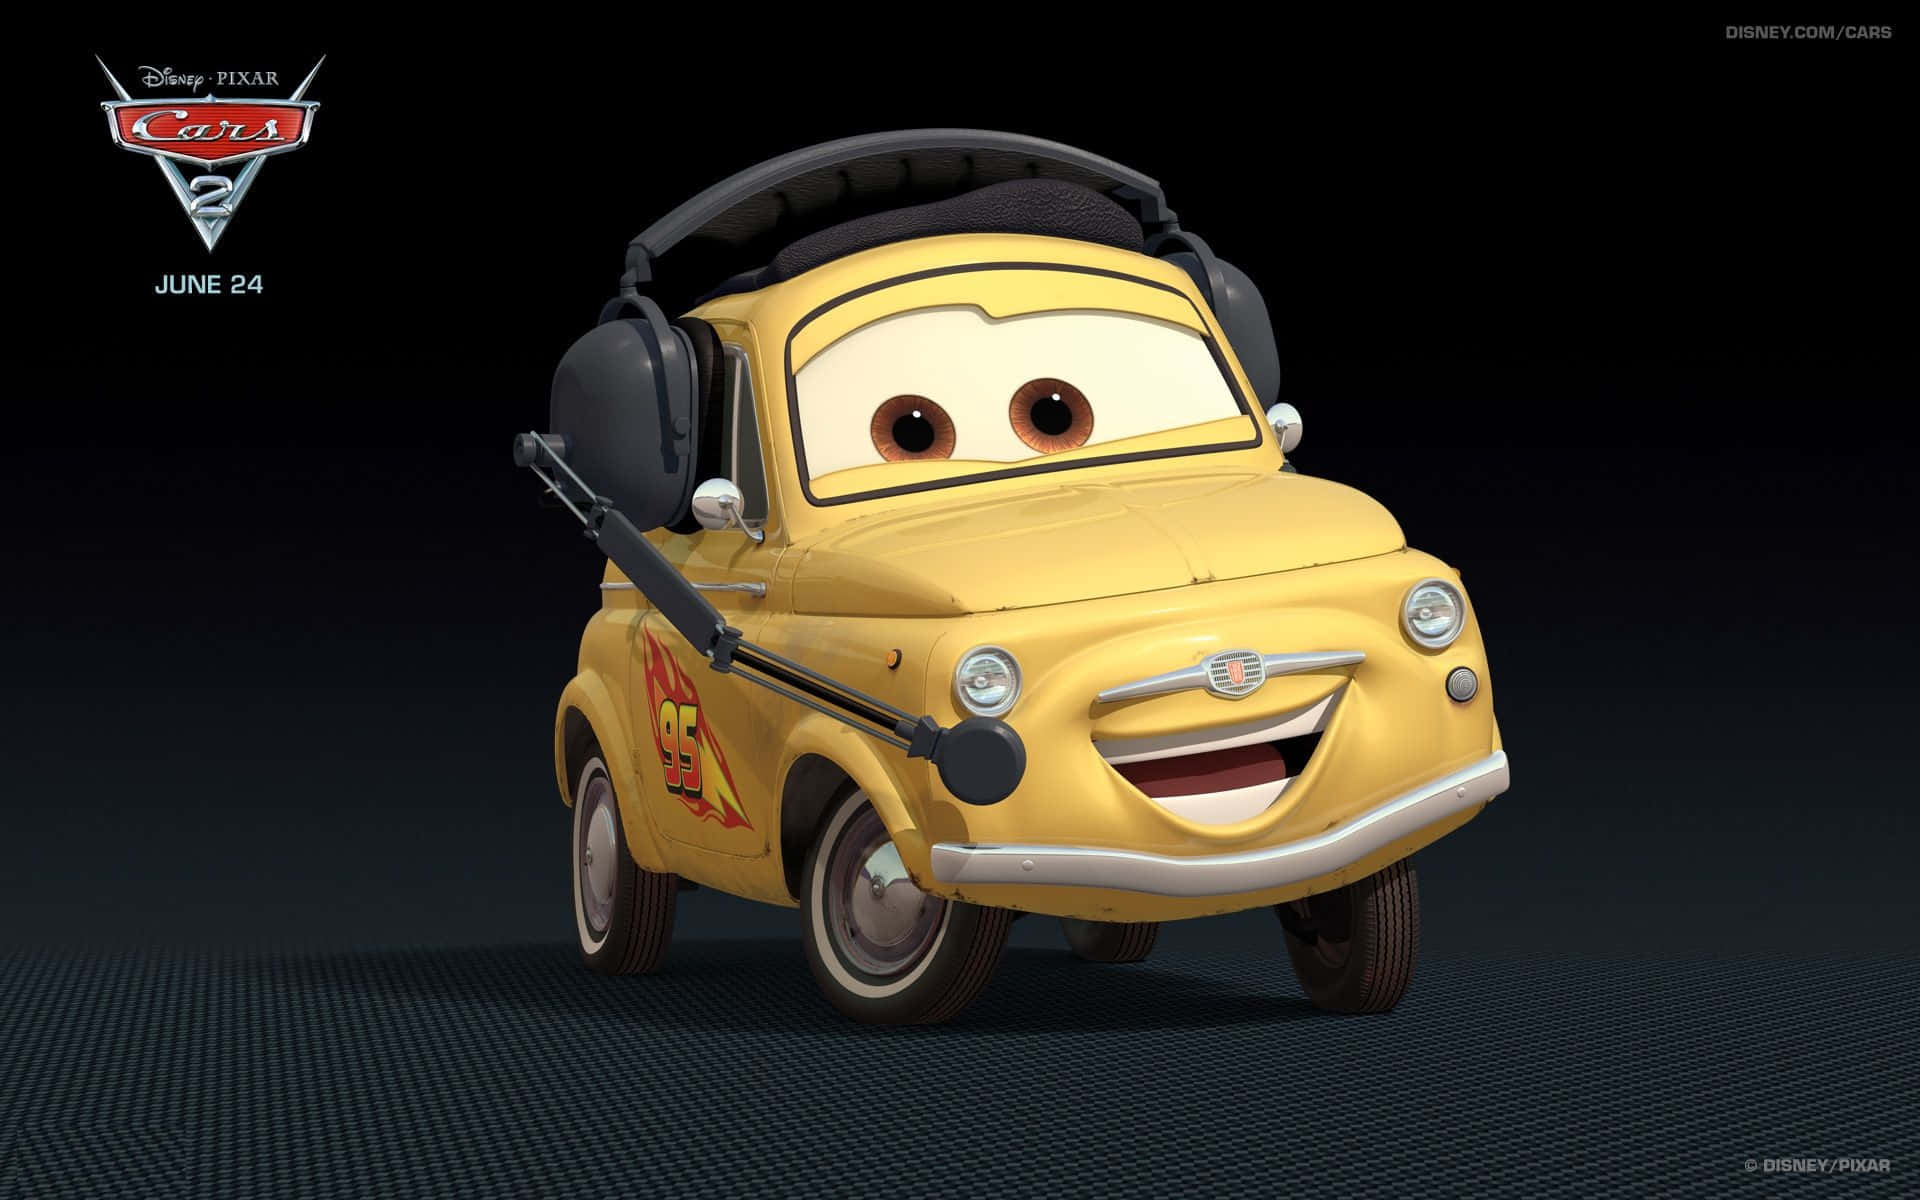 A Cartoon Car With Headphones On Is Smiling